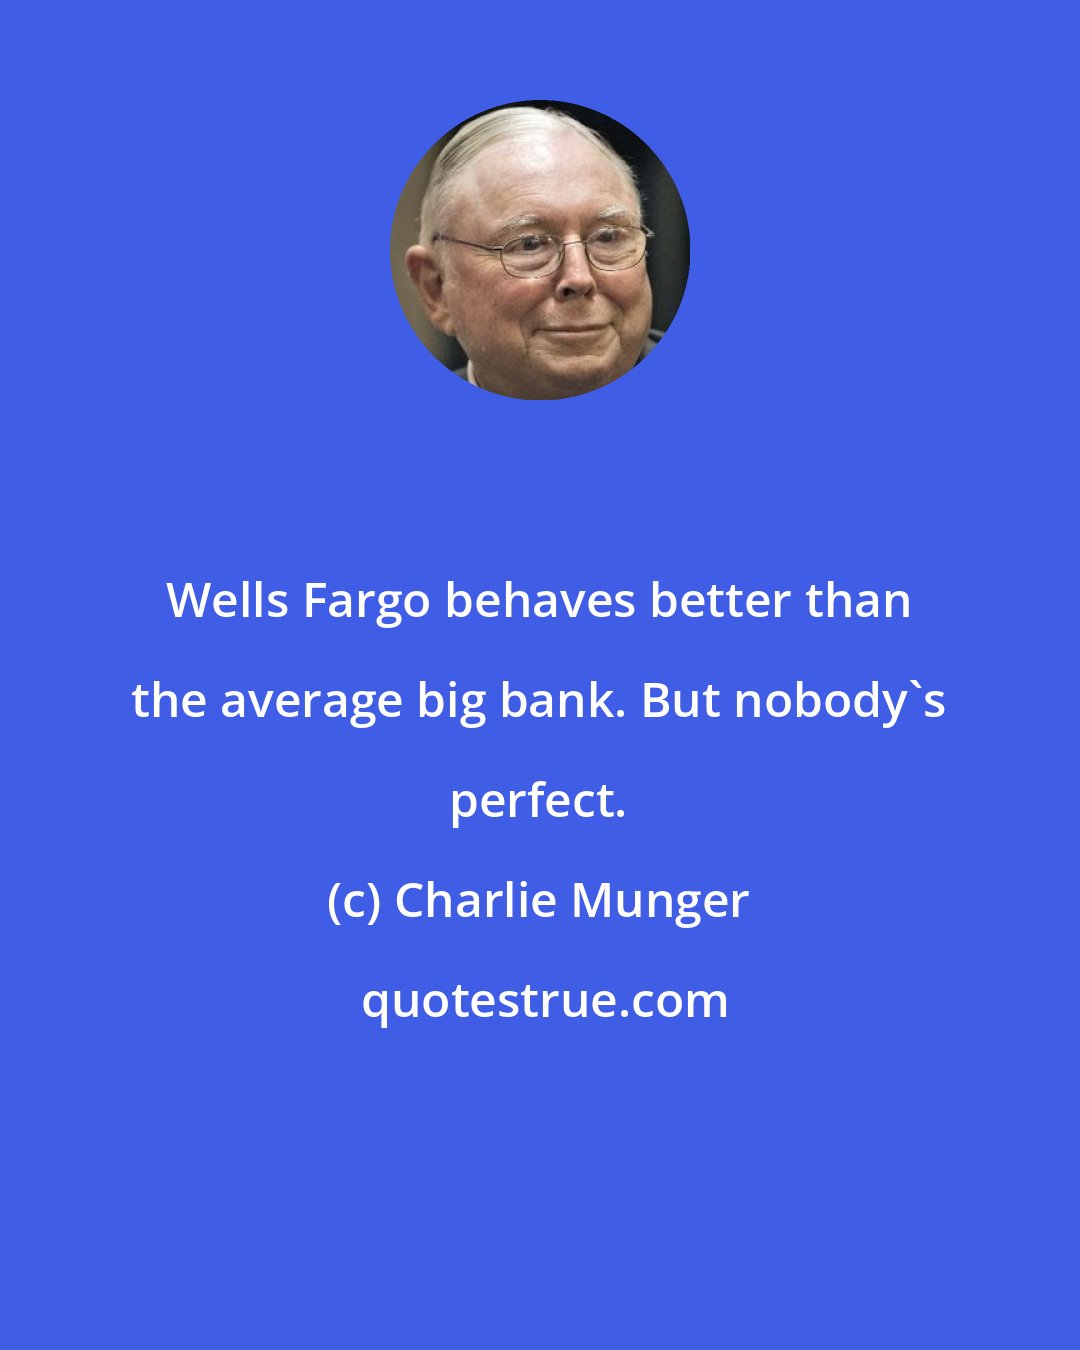 Charlie Munger: Wells Fargo behaves better than the average big bank. But nobody's perfect.